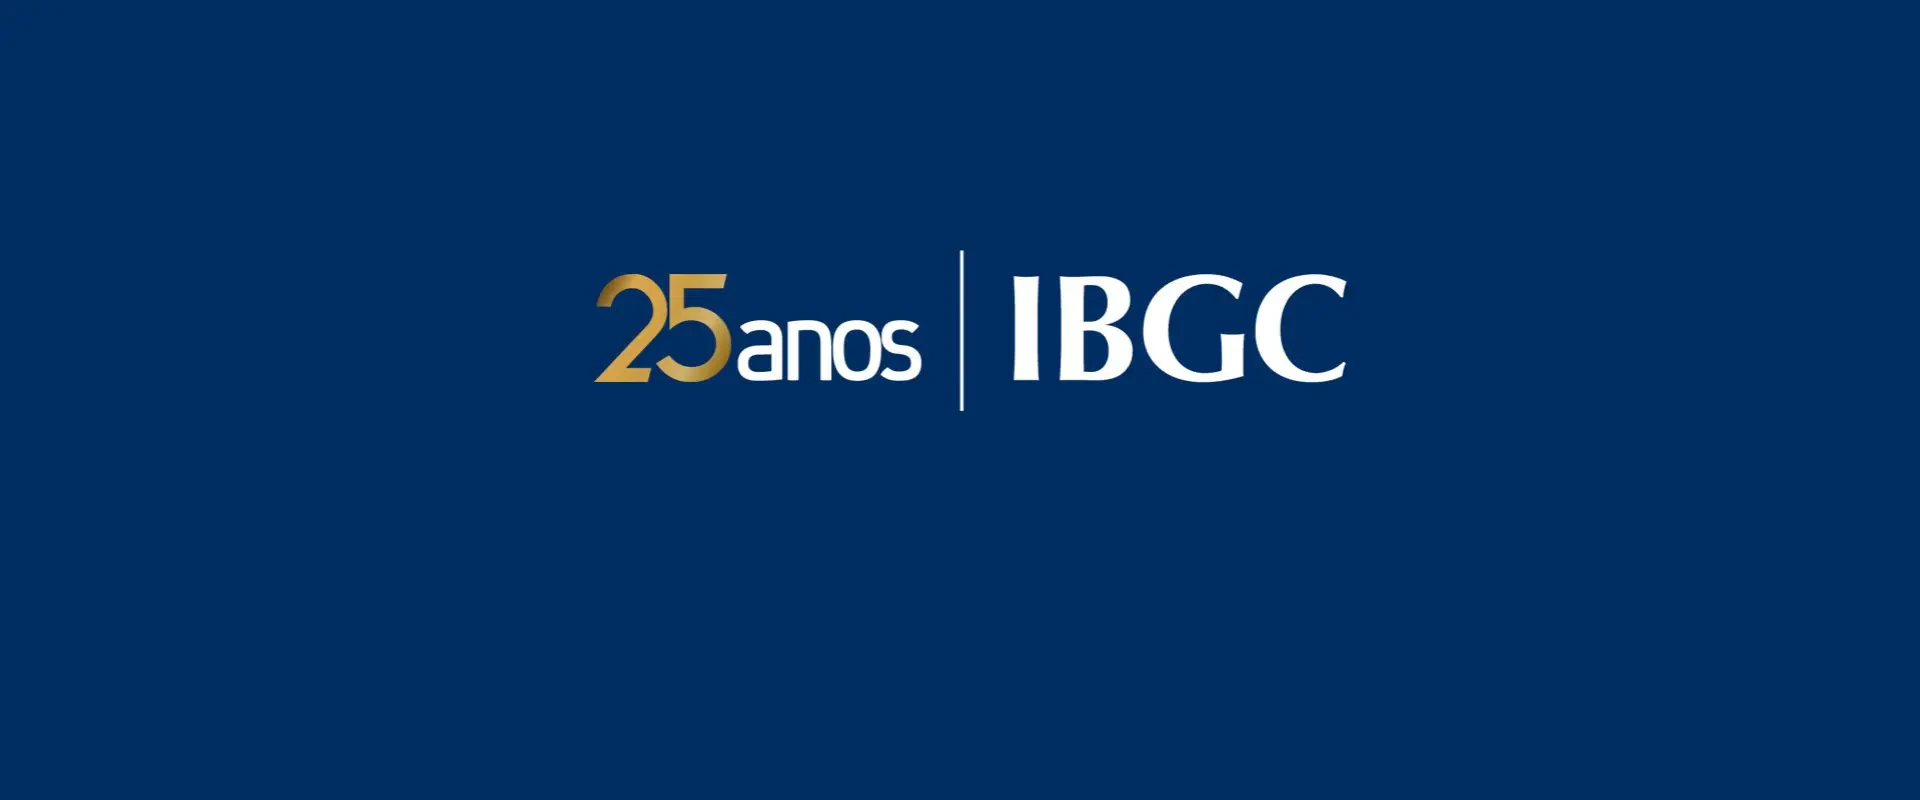 Board Evaluation: Practical Recommendations by IBGC